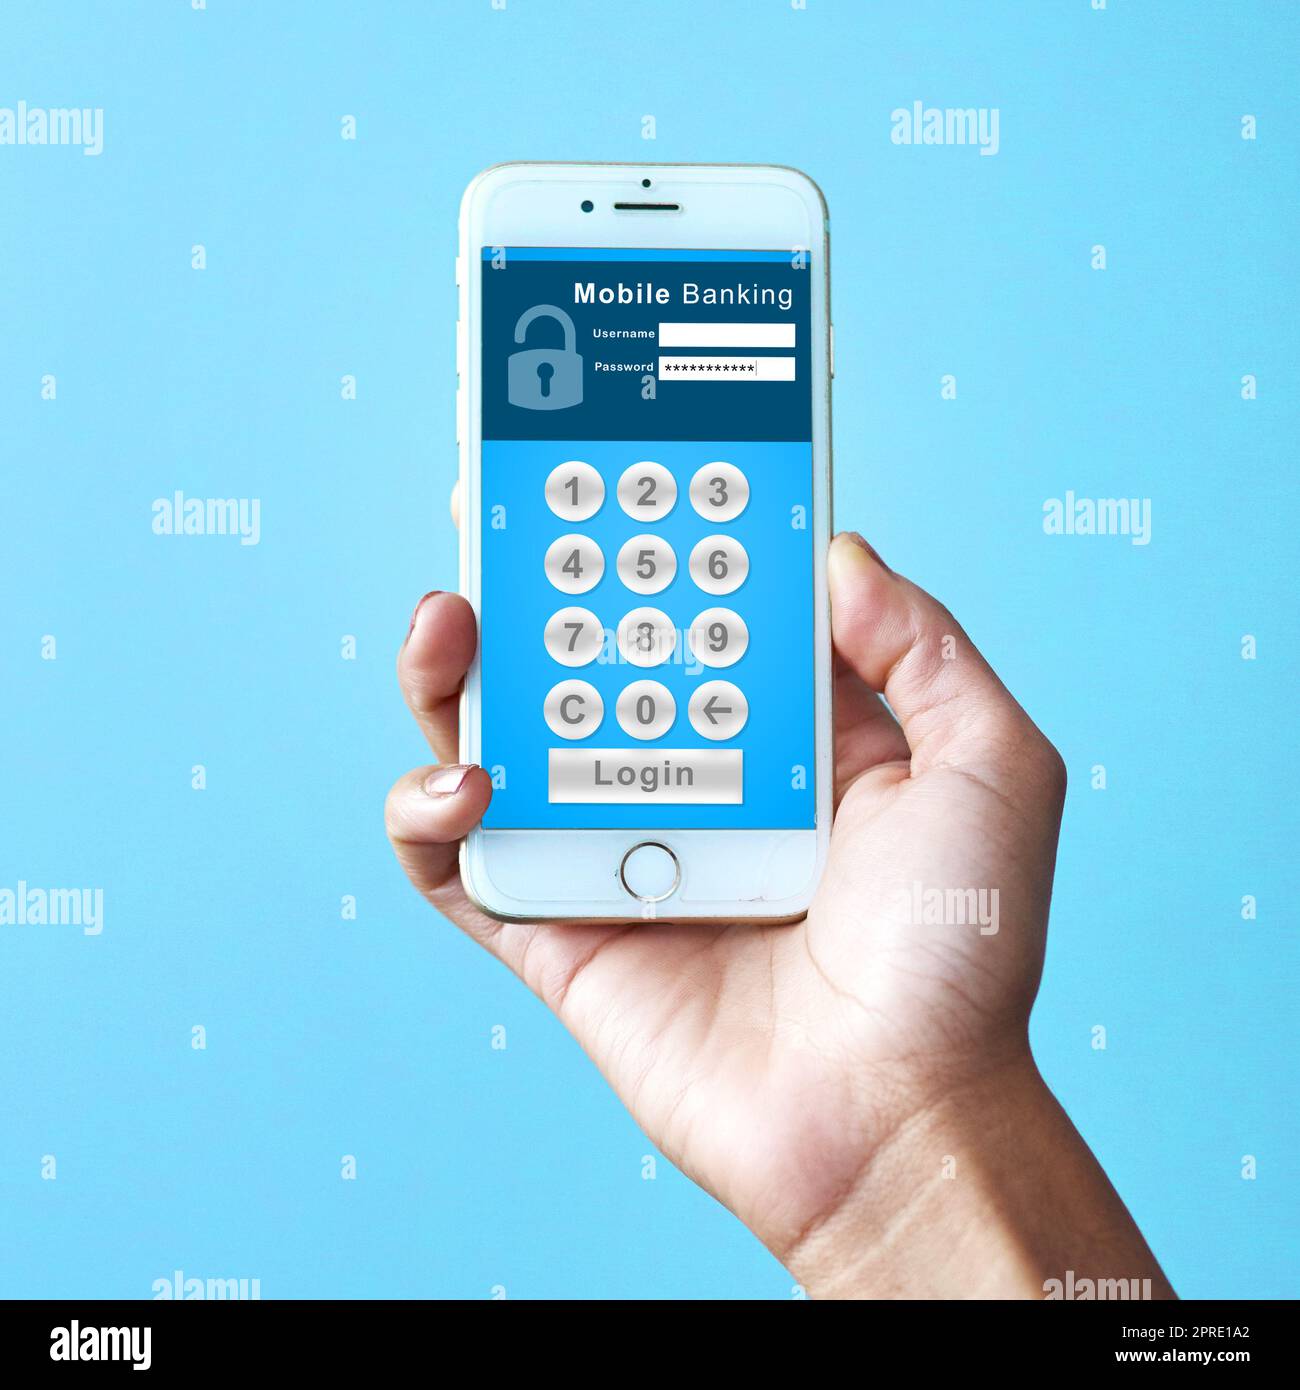 Pay your accounts on your cellphone. Studio shot of an unrecognizable woman holding a cellphone displaying an internet banking webpage against a blue background. Stock Photo